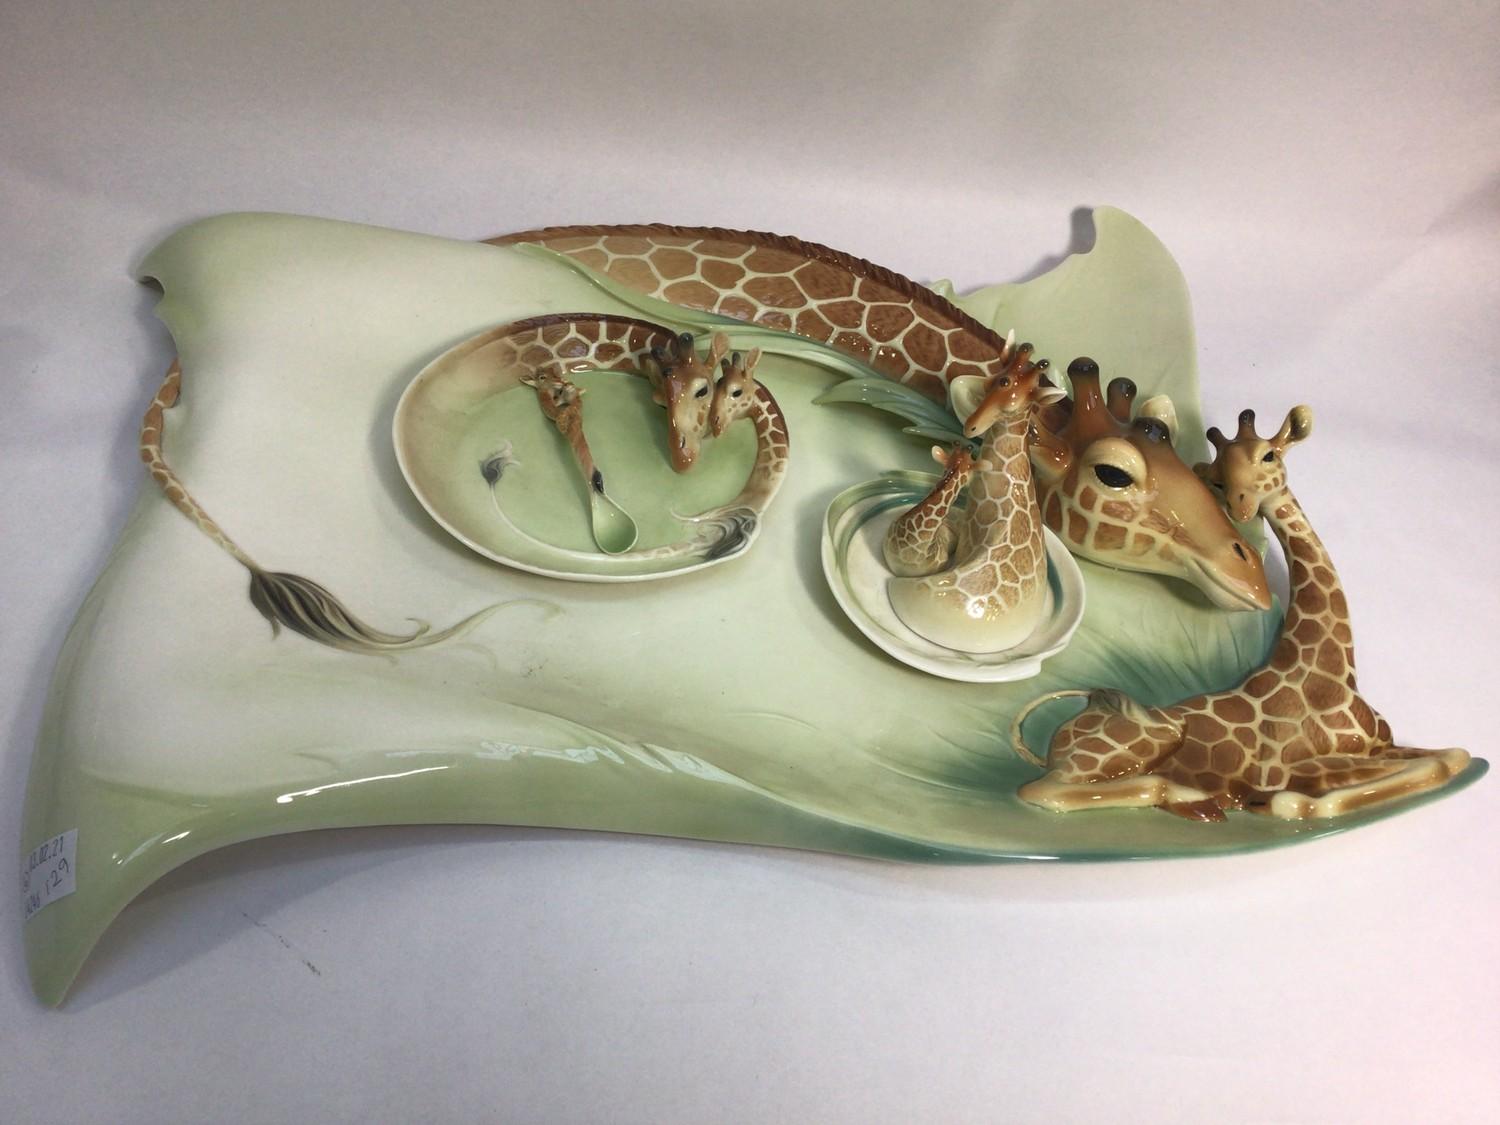 A large 20th century ceramic serving platter with relief giraffe and calf by Franz, limited - Image 2 of 7